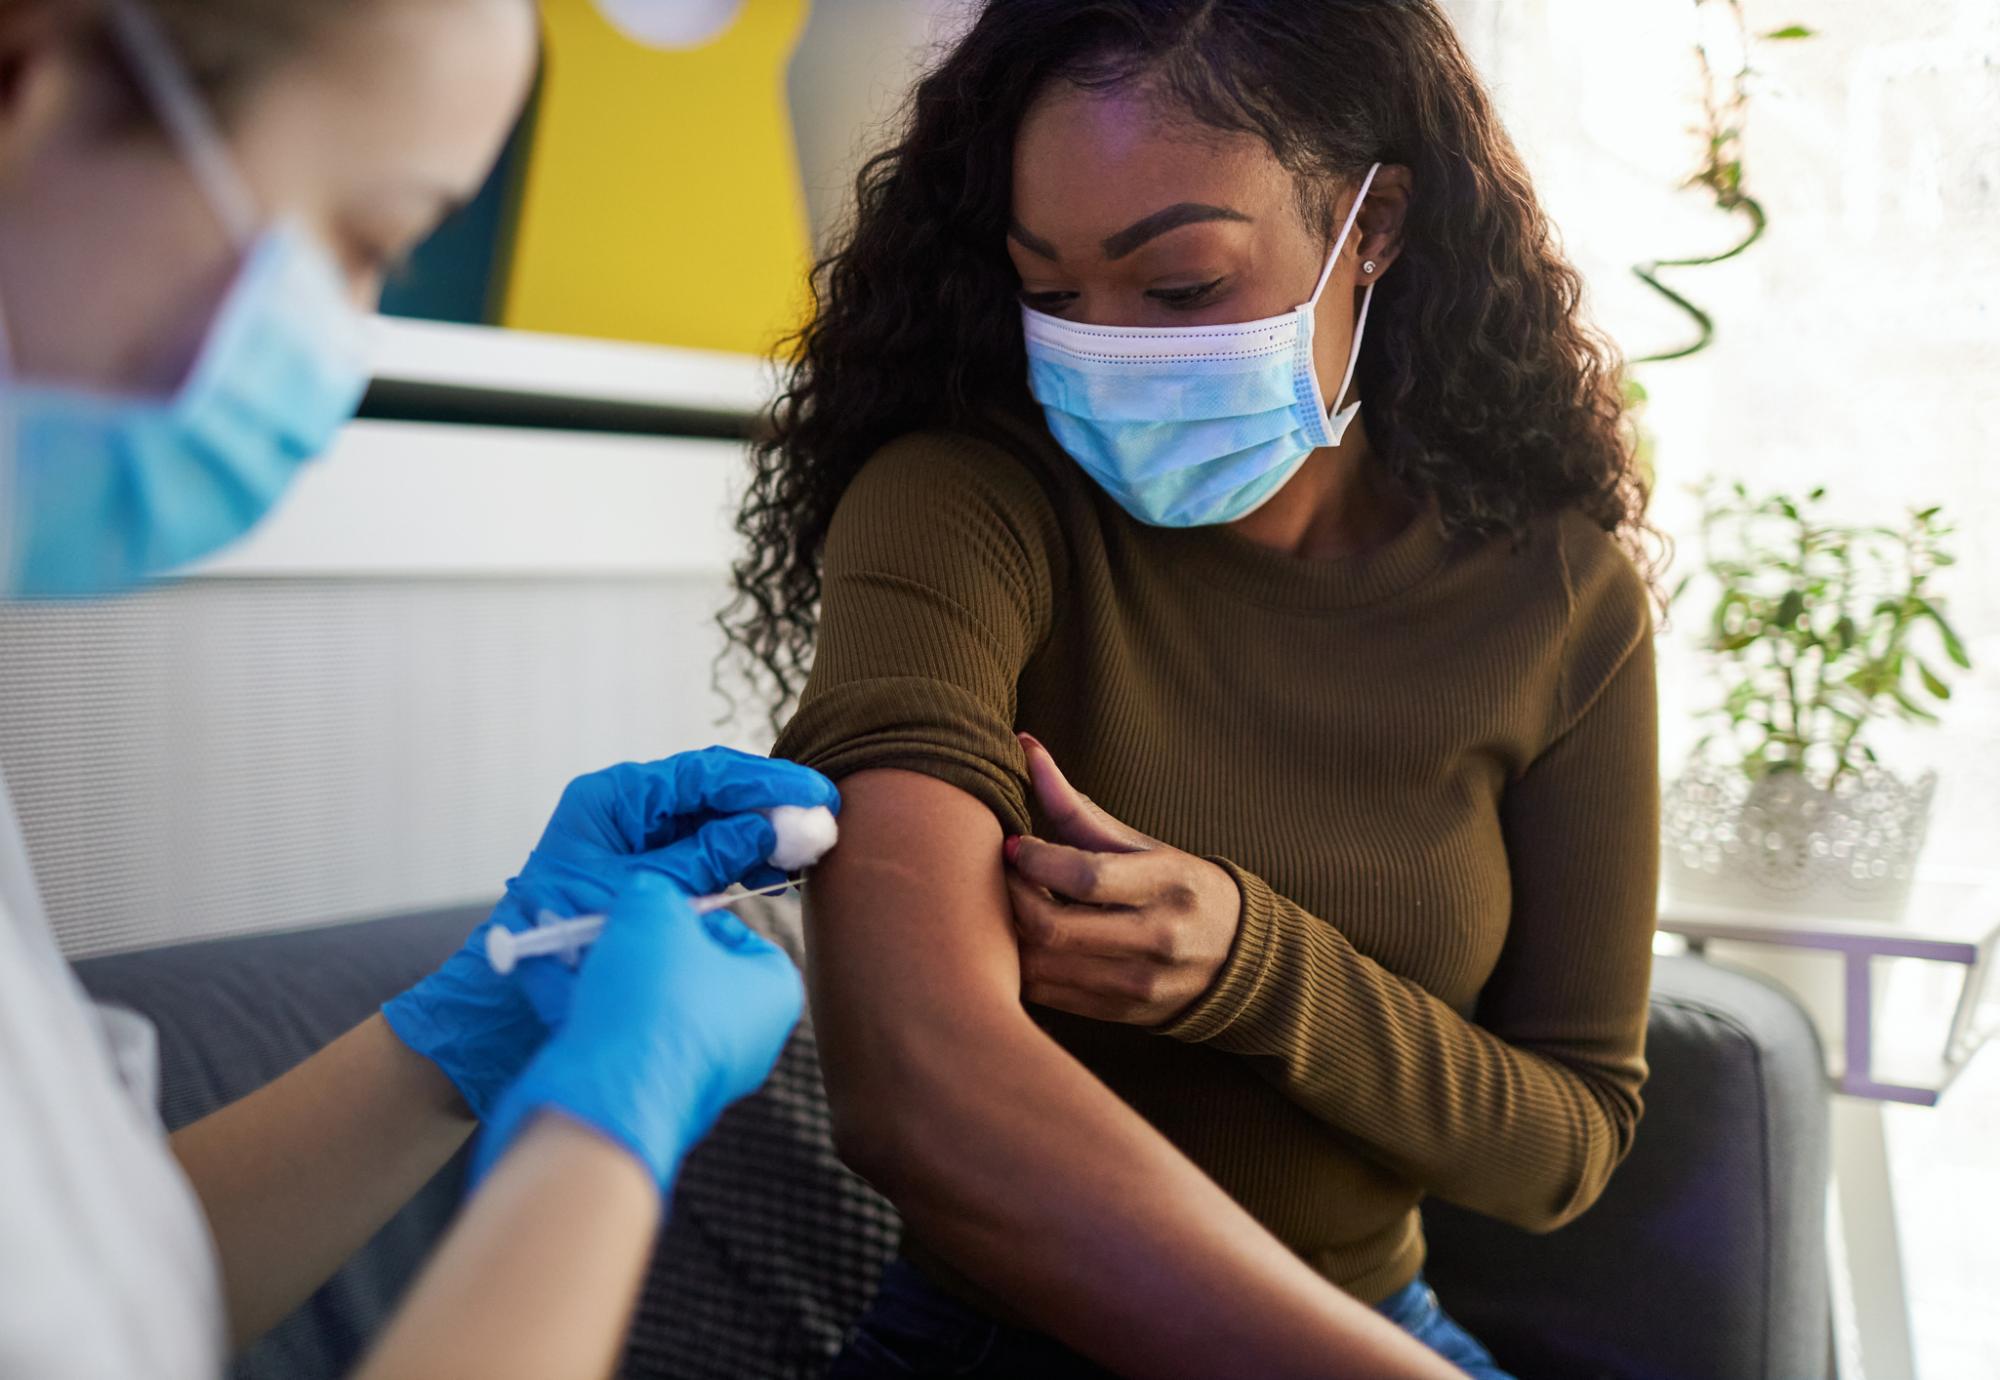 Vaccine jab being administered by a health professional